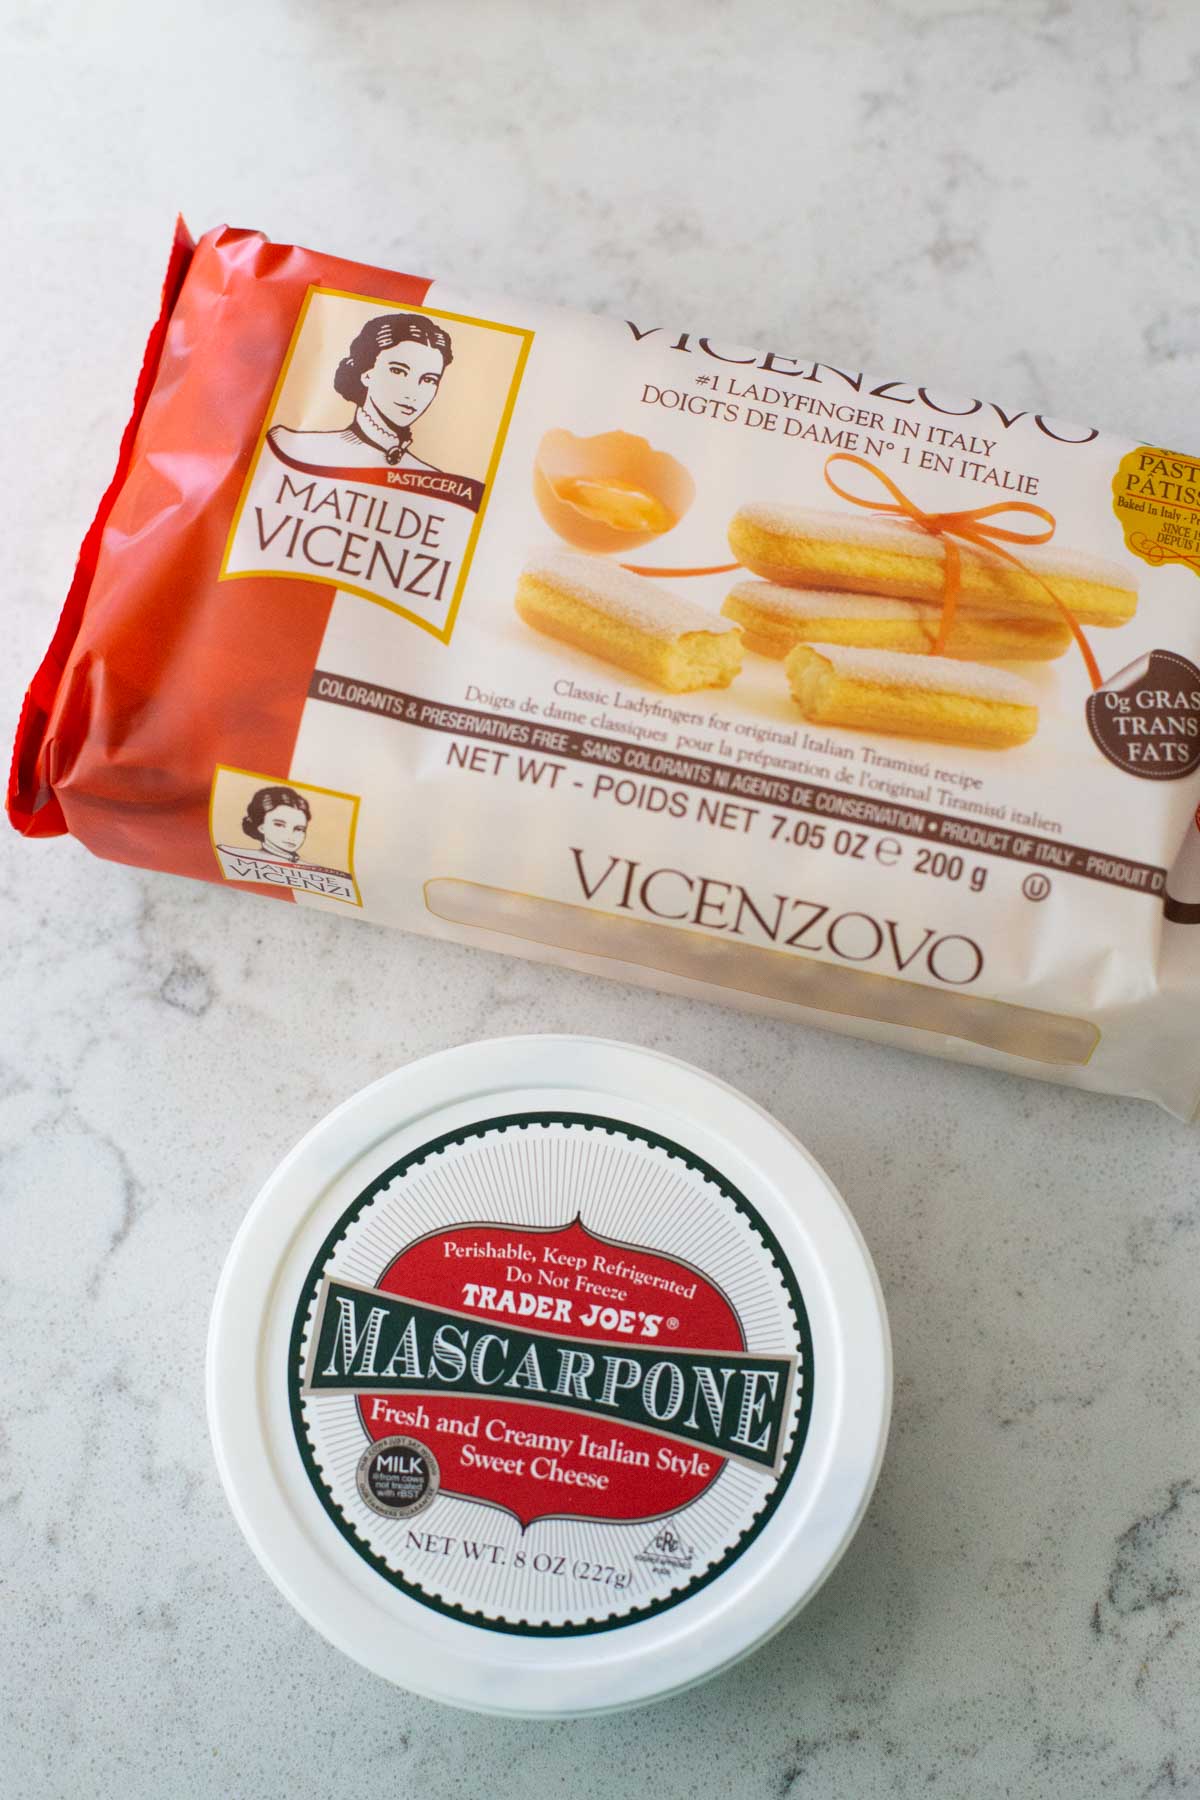 The two main ingredients for homemade tiramisu are the lady finger cookies and mascarpone chese.